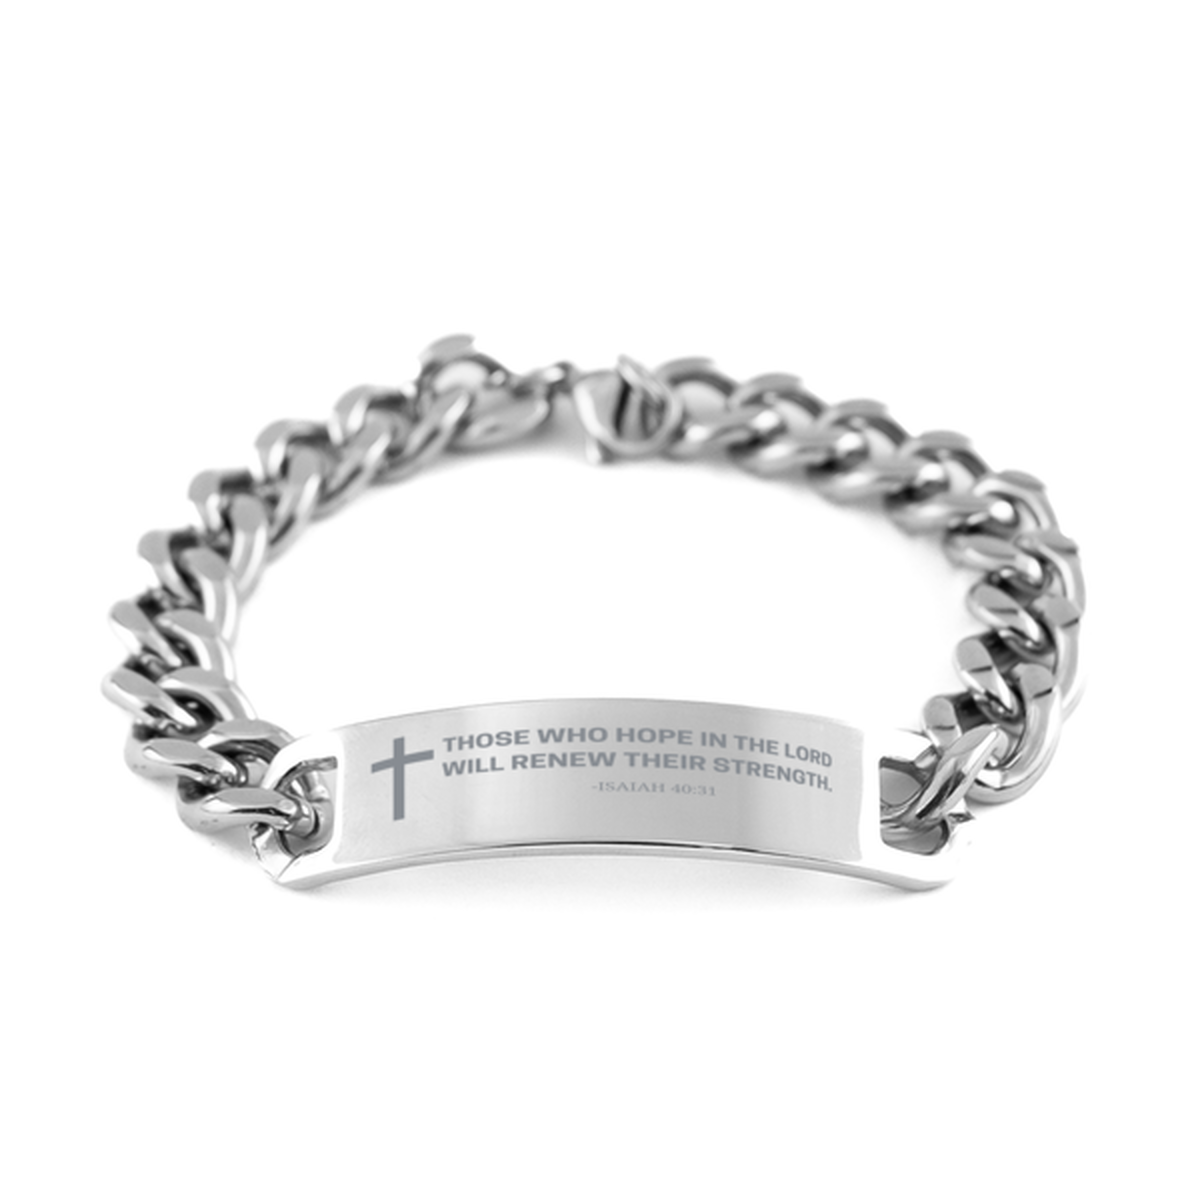 Baptism Gifts For Teenage Boys Girls, Christian Bible Verse Cuban Chain Bracelet, Those who hope in the Lord, Catholic Confirmation Gifts for Son, Godson, Grandson, Nephew